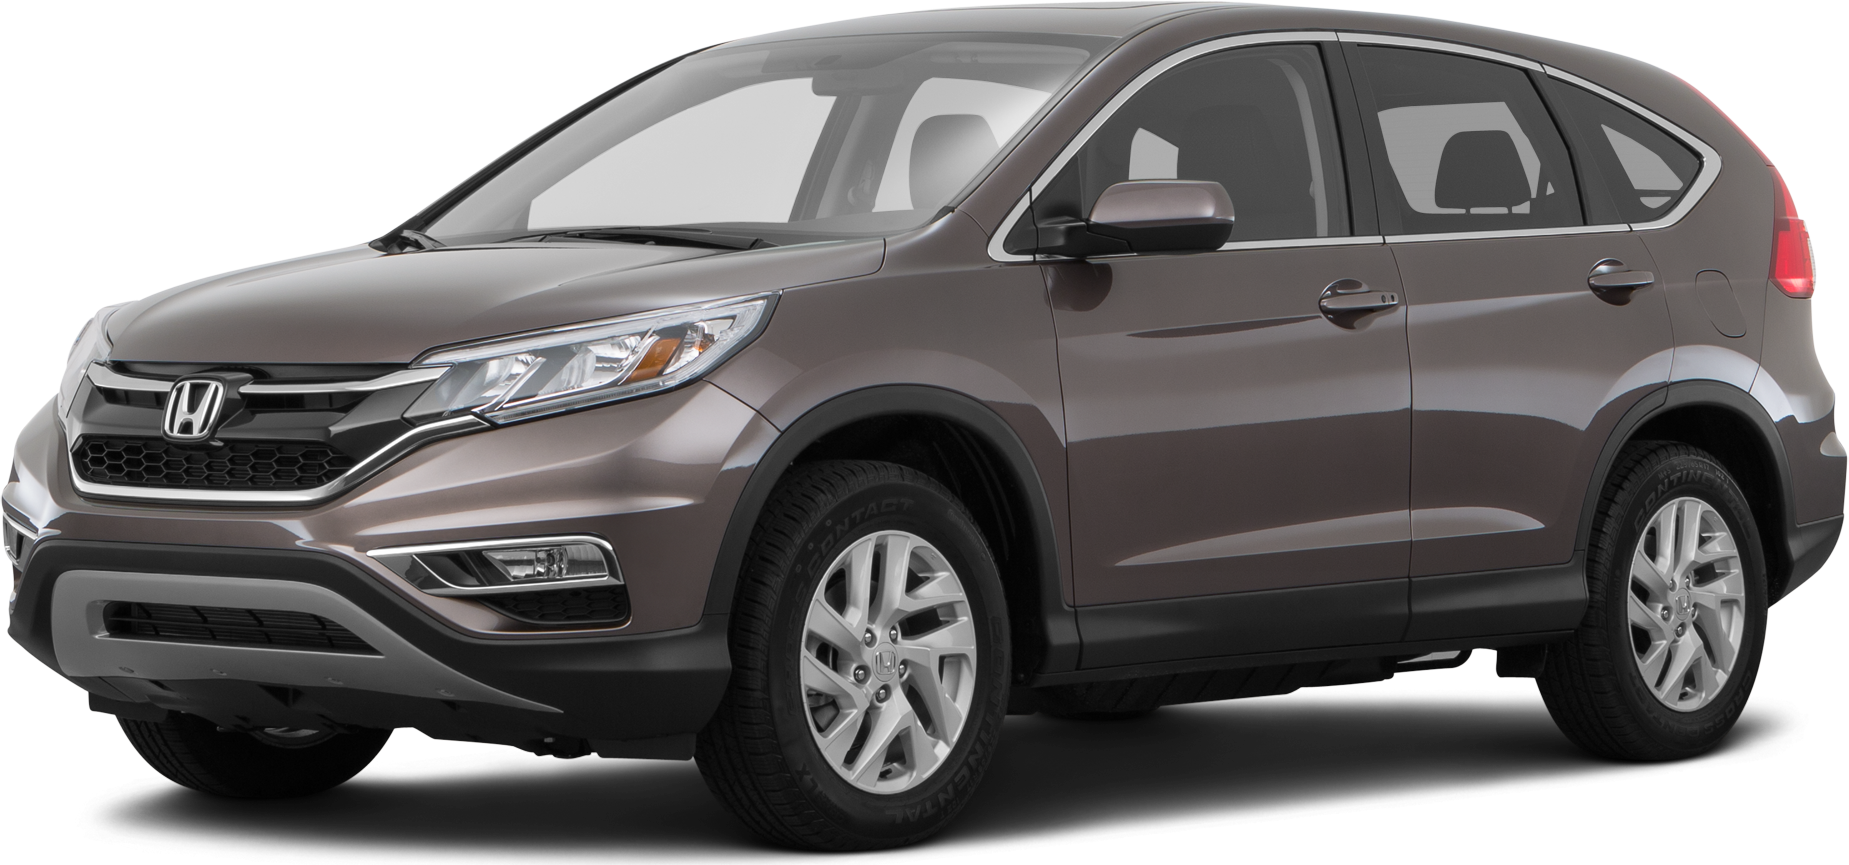 2015 Honda Cr V Values And Cars For Sale Kelley Blue Book